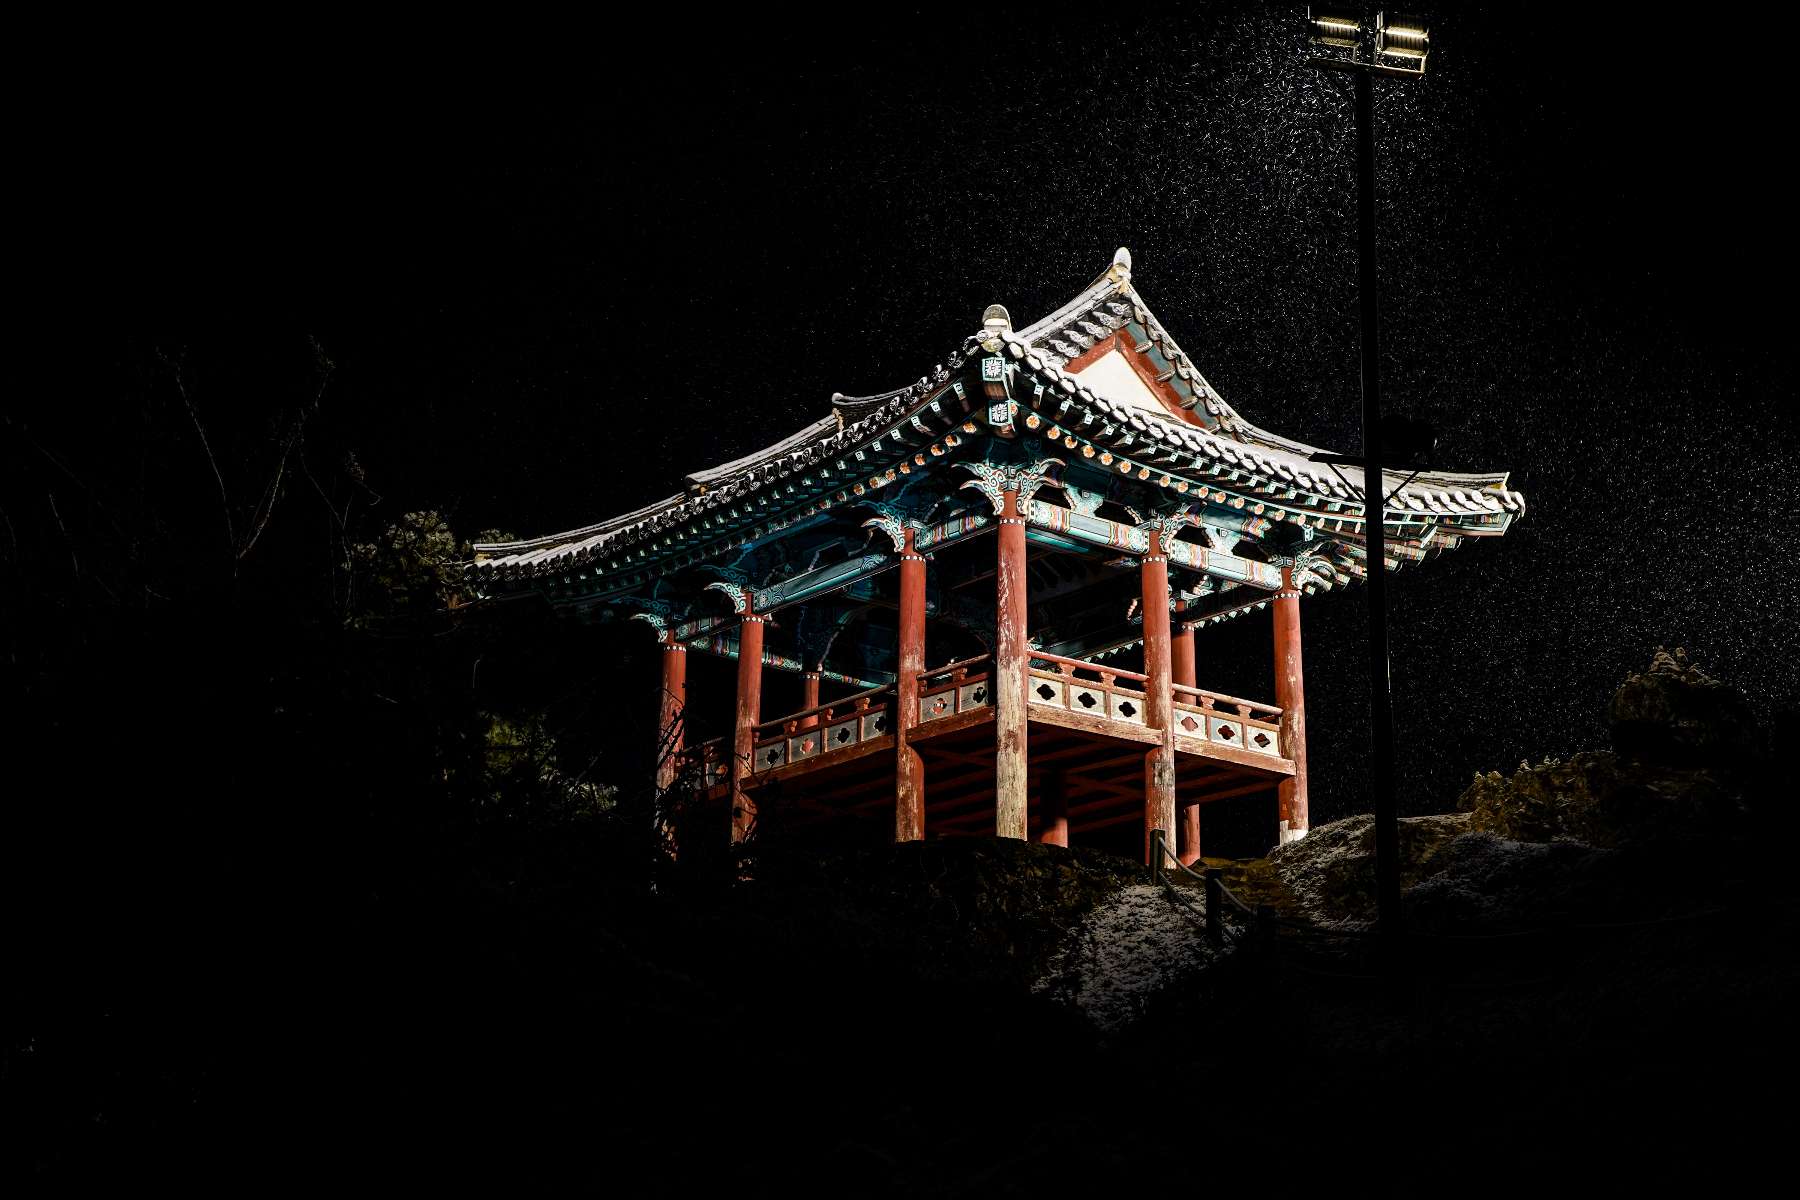 a traditional structure in south korea in the dark being coated in snow